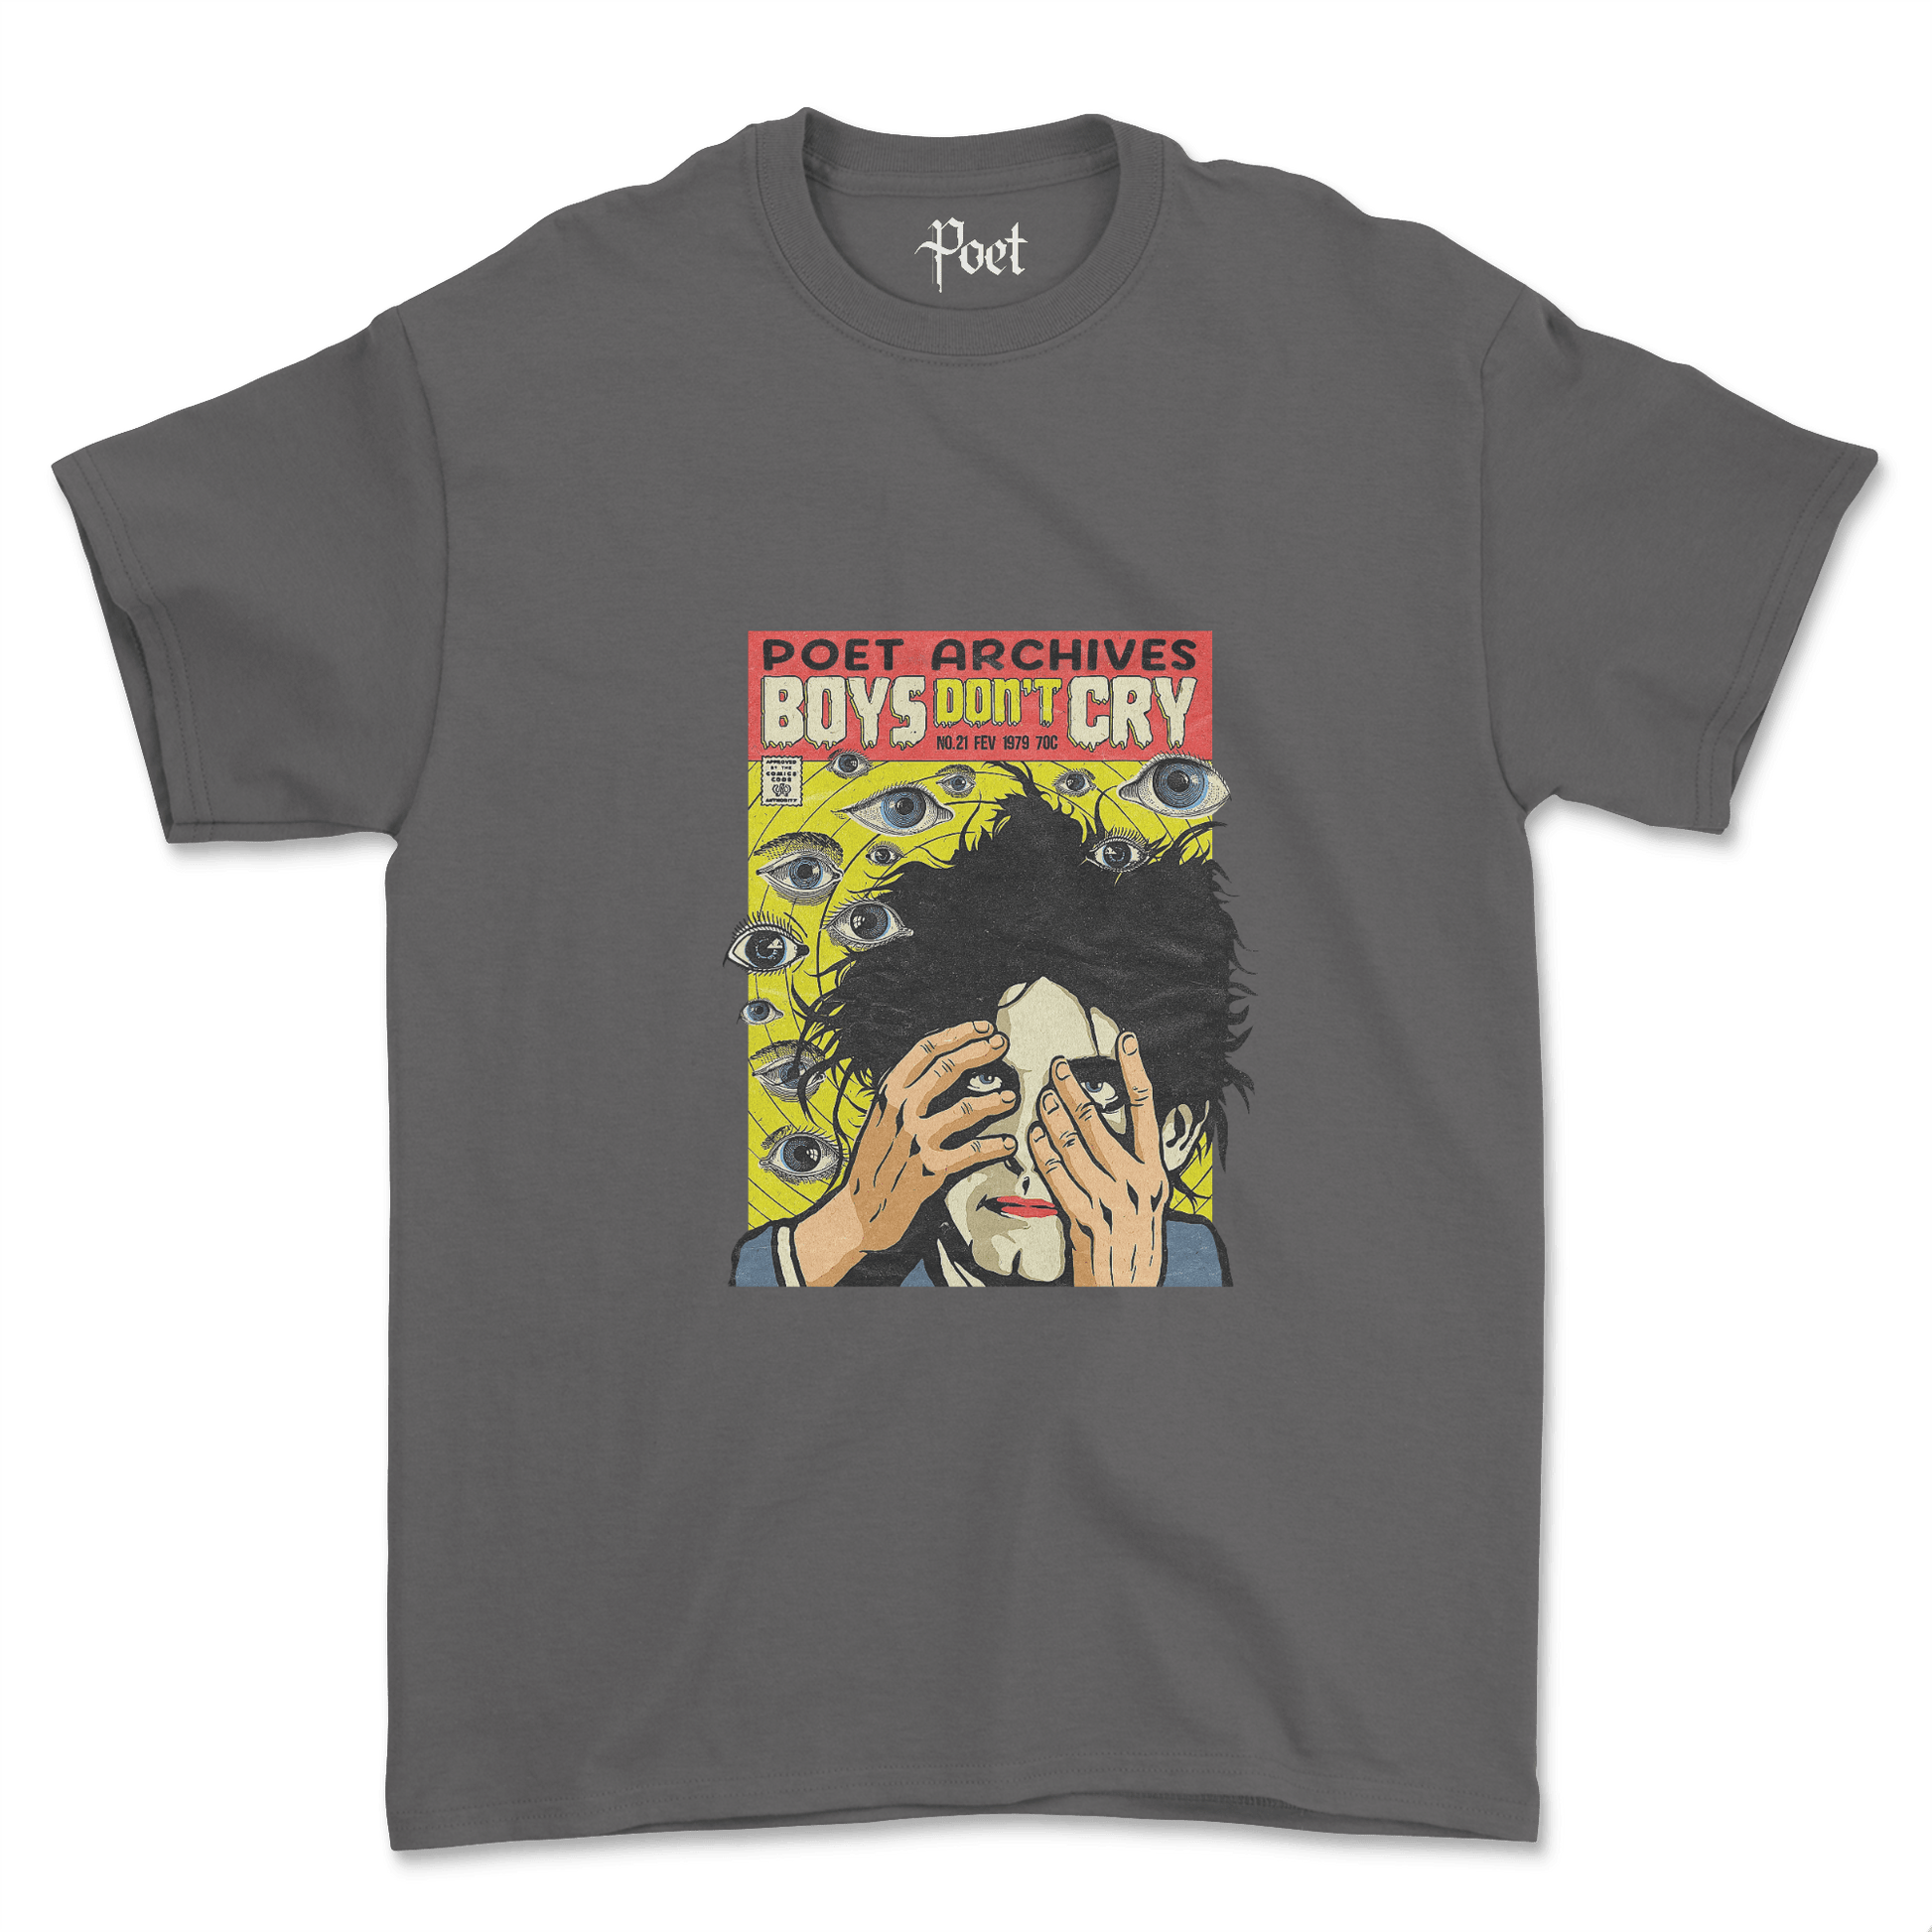 The Cure T-Shirt - Poet Archives